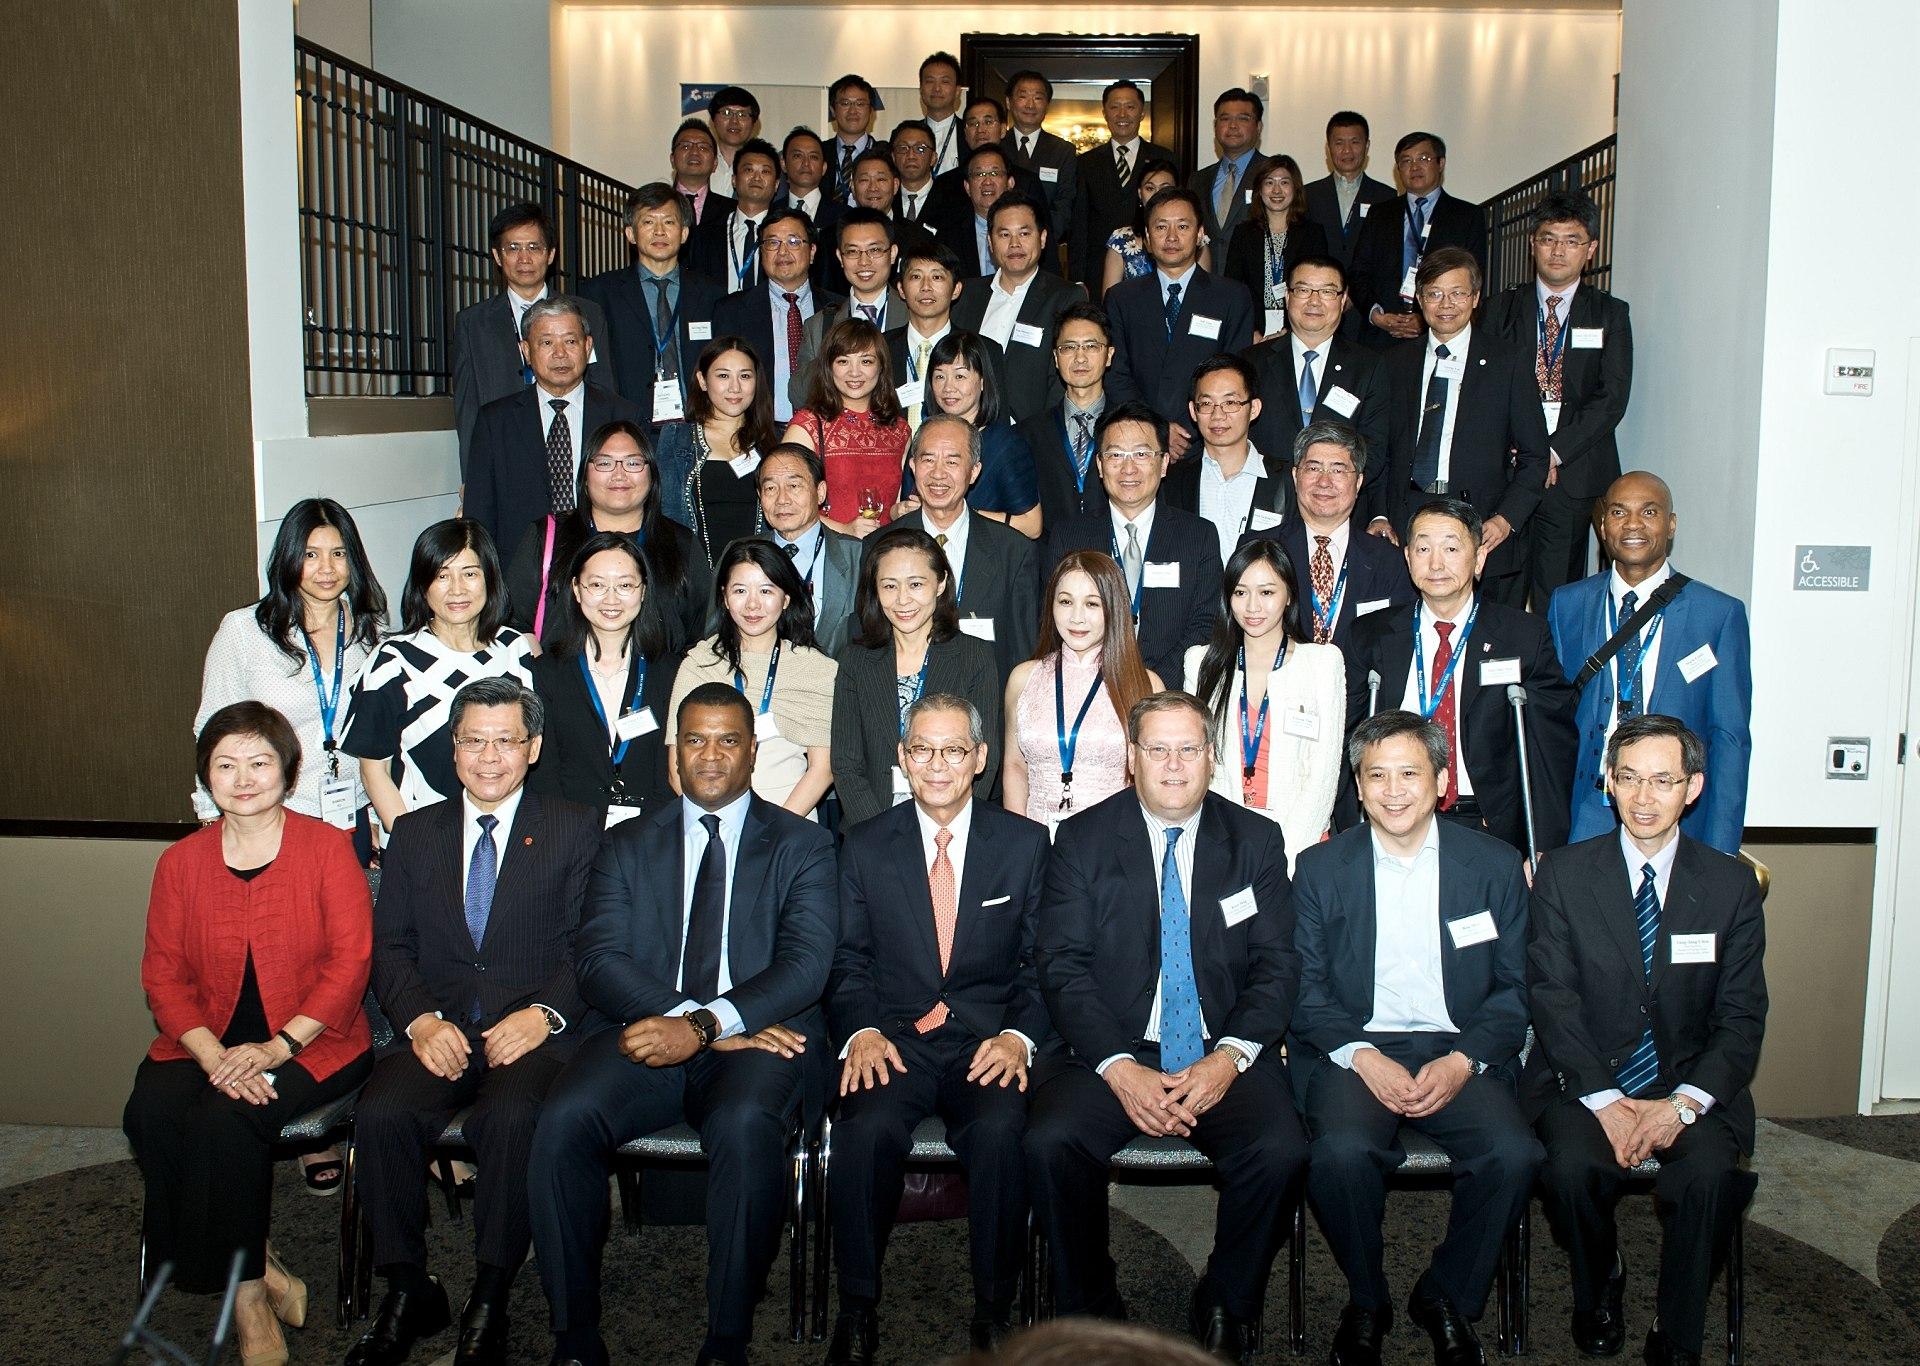 TECRO hosted a welcome dinner for the business delegation from Taiwan to the third SelectUSA Investment Summit on June 19, 2016. First row: TECRO Representative Stanley Kao（center）; Marcus Jadotte (third from left), Assistant Secretary of Commerce; Kurt Tong (third from right), Principal Deputy Assistant Secretary for the Bureau of Economic and Business Affairs at the Department of State; Kin Moy (second from right), Director of AIT in Taiwan; and Francis Kuo-Hsin Liang (second from left), Chairman of the Taiwan External Trade Development Council.